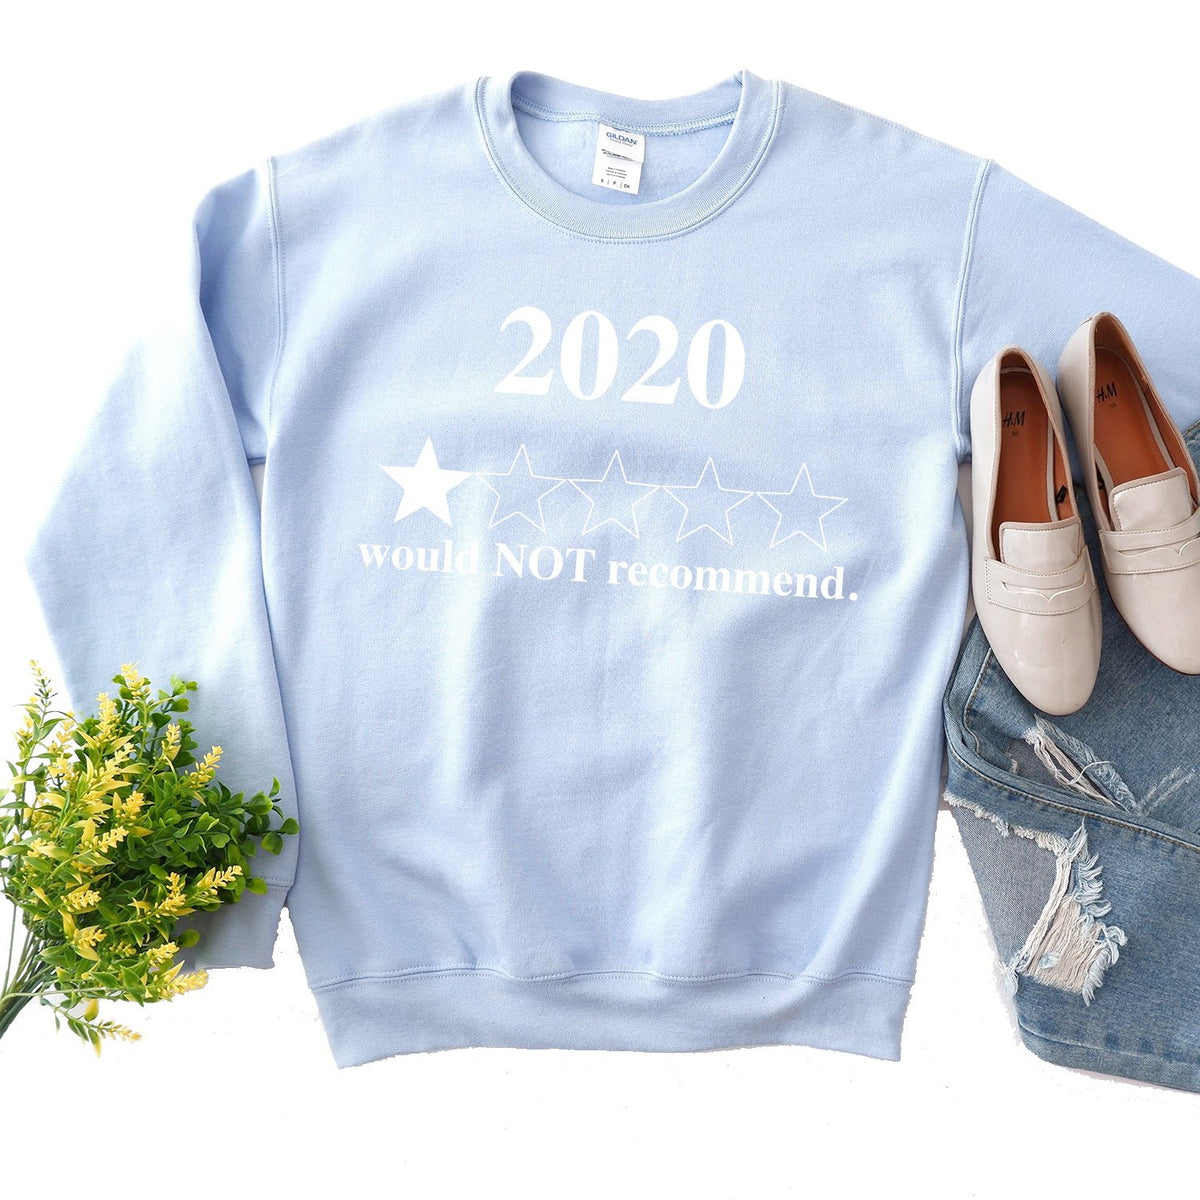 2020 Would Not Recommend - Long Sleeve Heavy Crewneck Sweatshirt